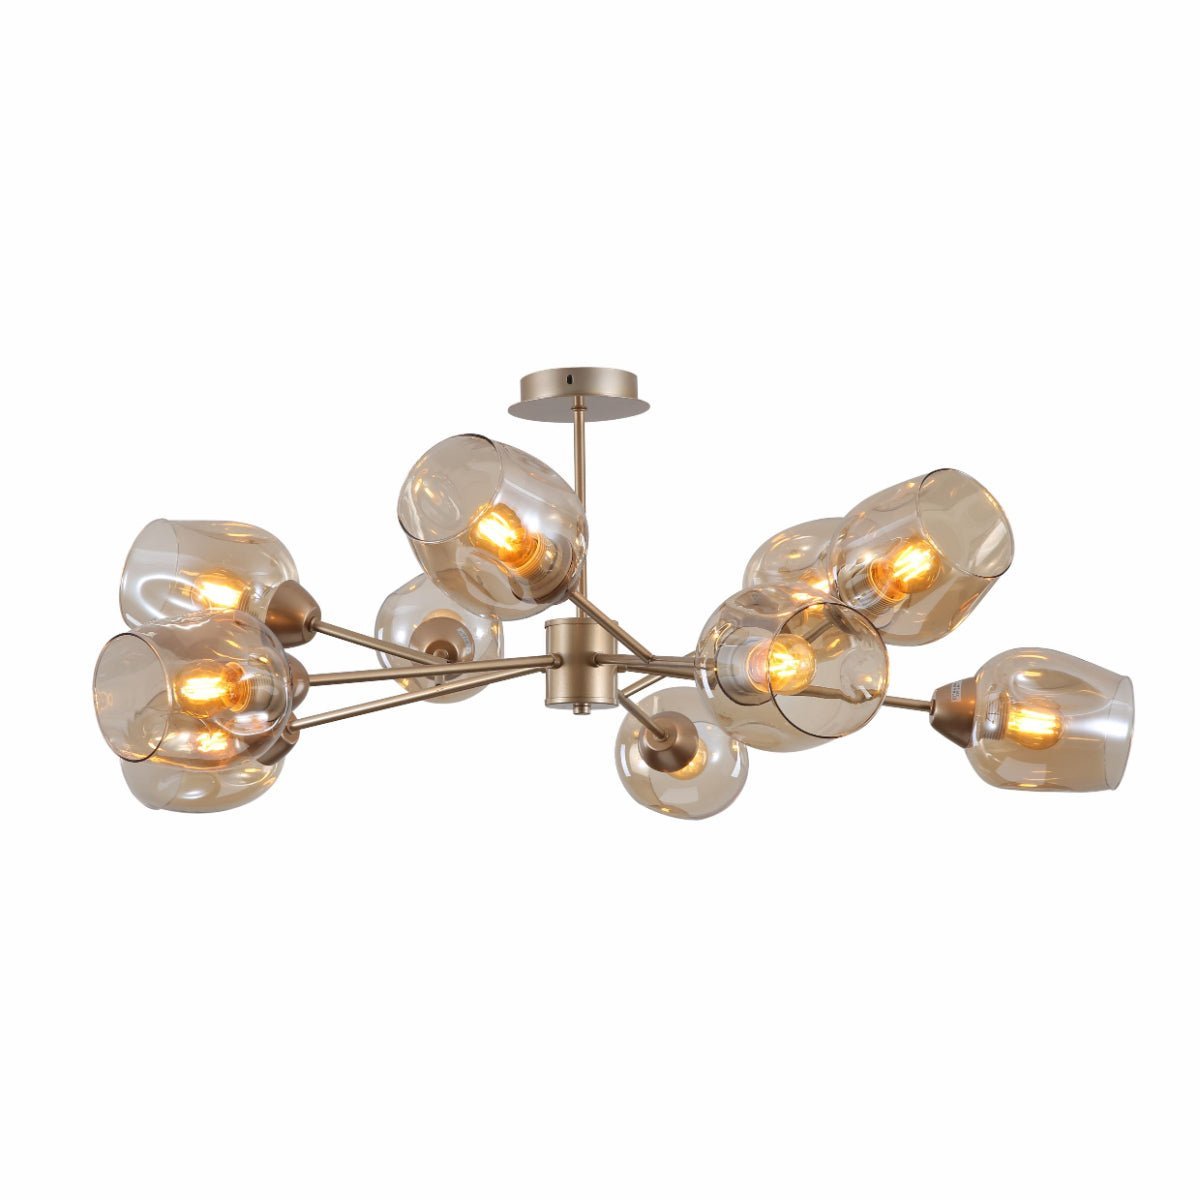 Main image of Amber Glass Metalic Gold Branch Twig Semi Flush Modern Ceiling Light with 10xE27 Fitting | TEKLED 159-17816